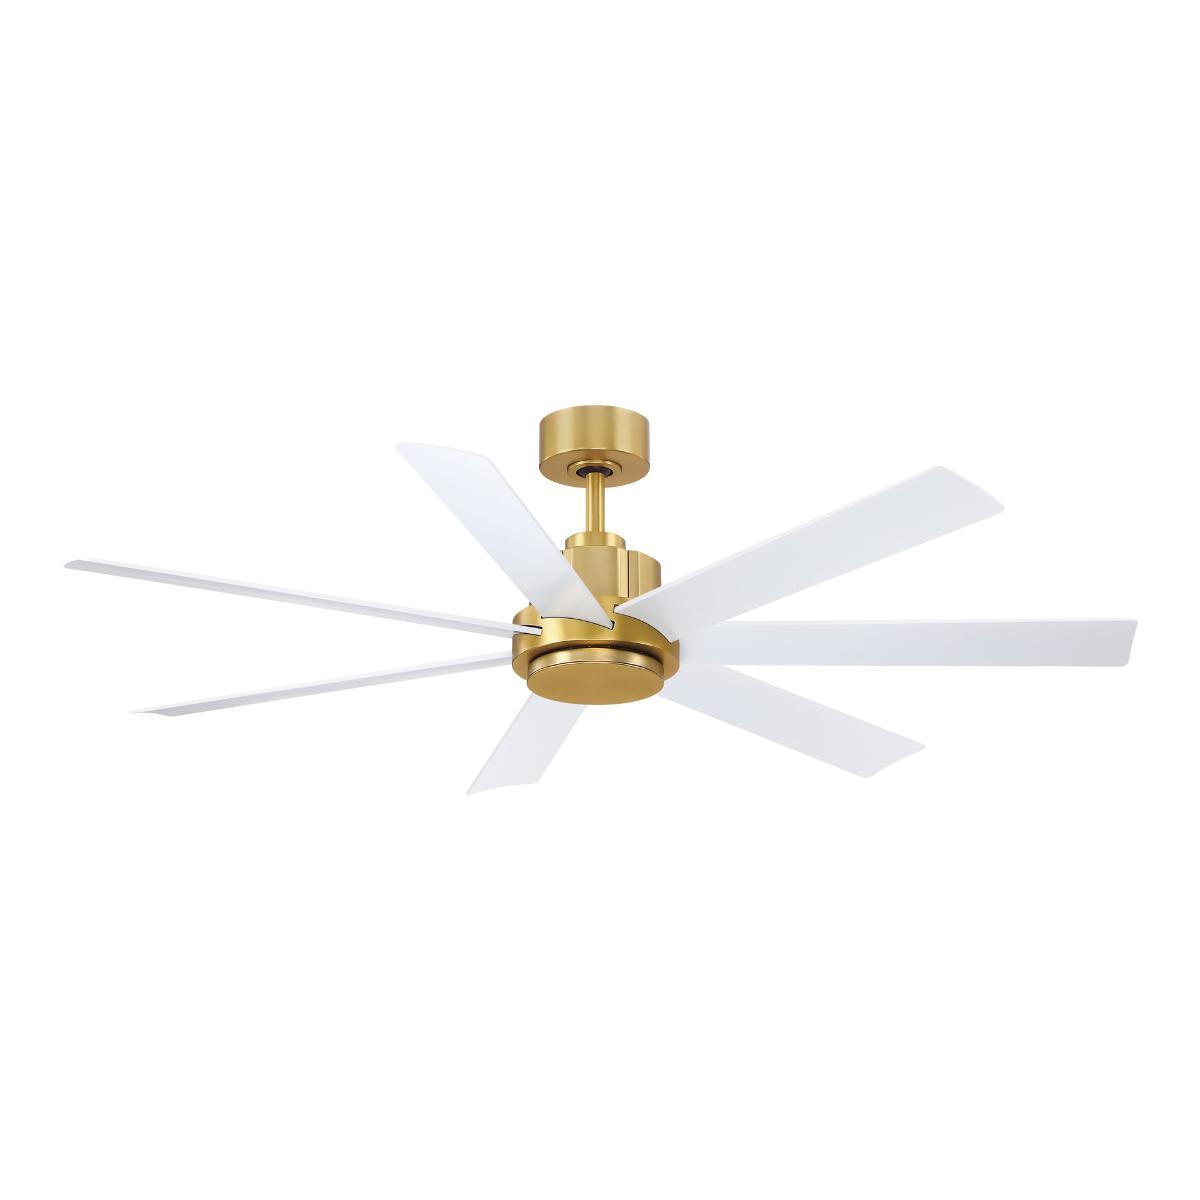 Pendry 56 inch Indoor/Outdoor Ceiling Fan with Remote, Brushed Satin Brass with Matte White Blades - Bees Lighting